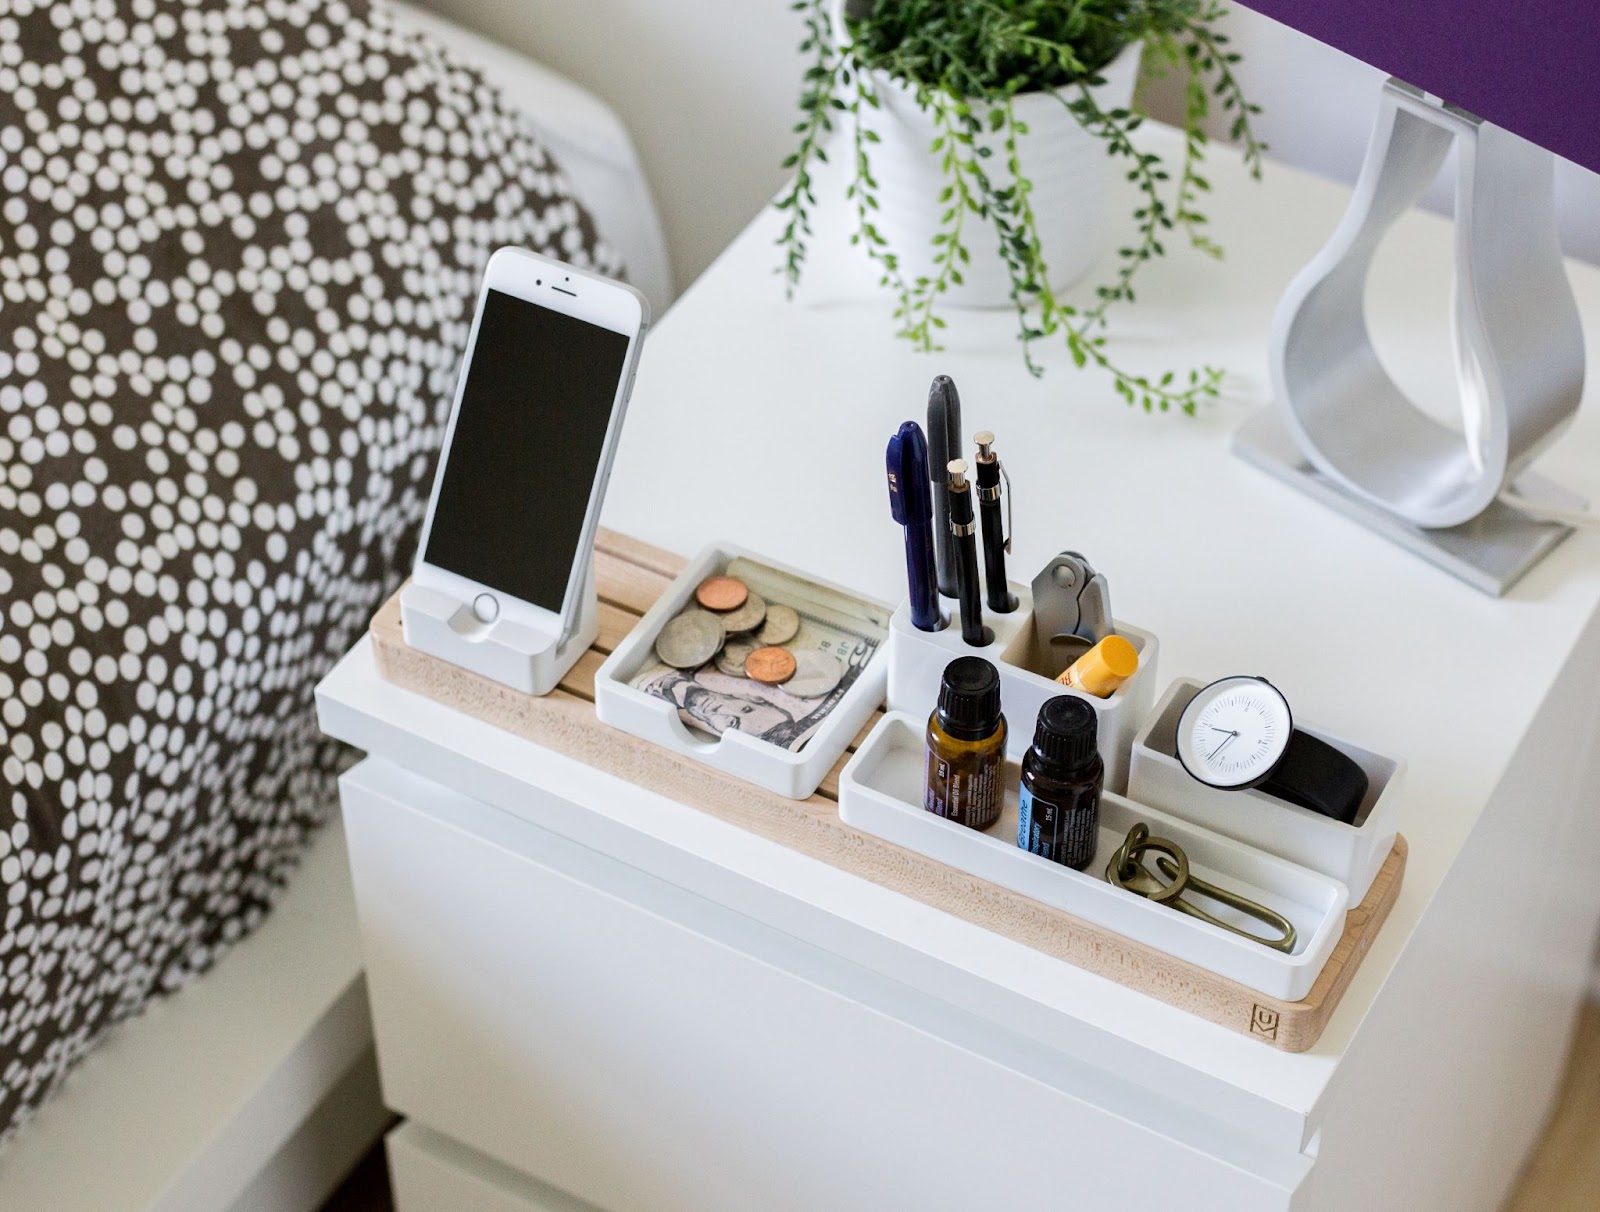 What Are the Essential items for your bedside table?